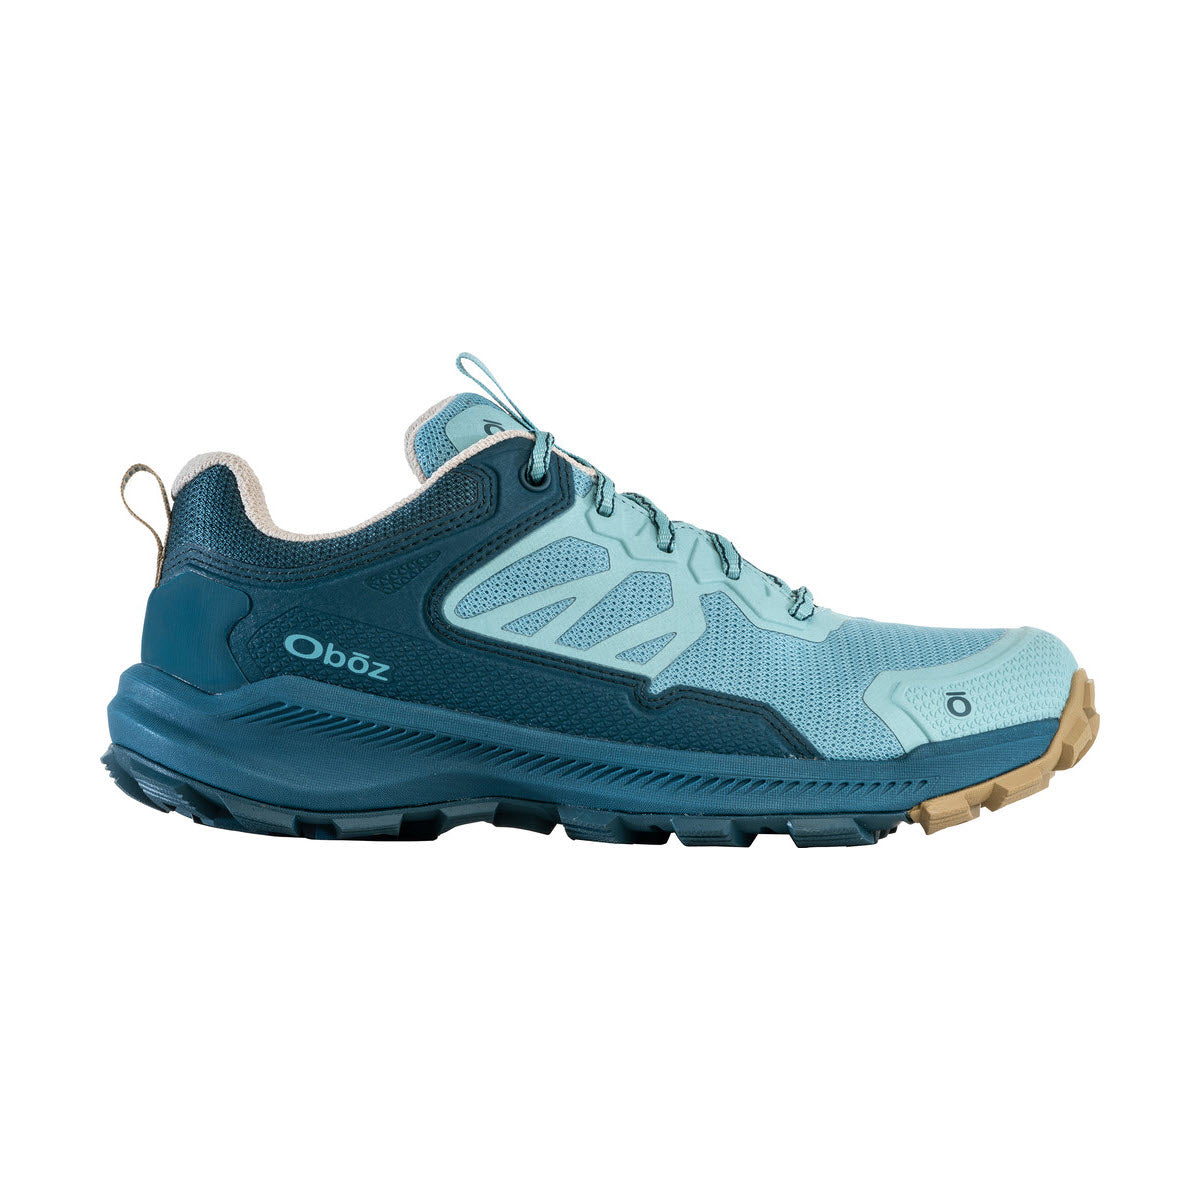 A light blue OBOZ KATABATIC LOW DARK ISLAND - WOMENS hiking shoe with laces, a rugged sole, and the brand logo visible on the side.